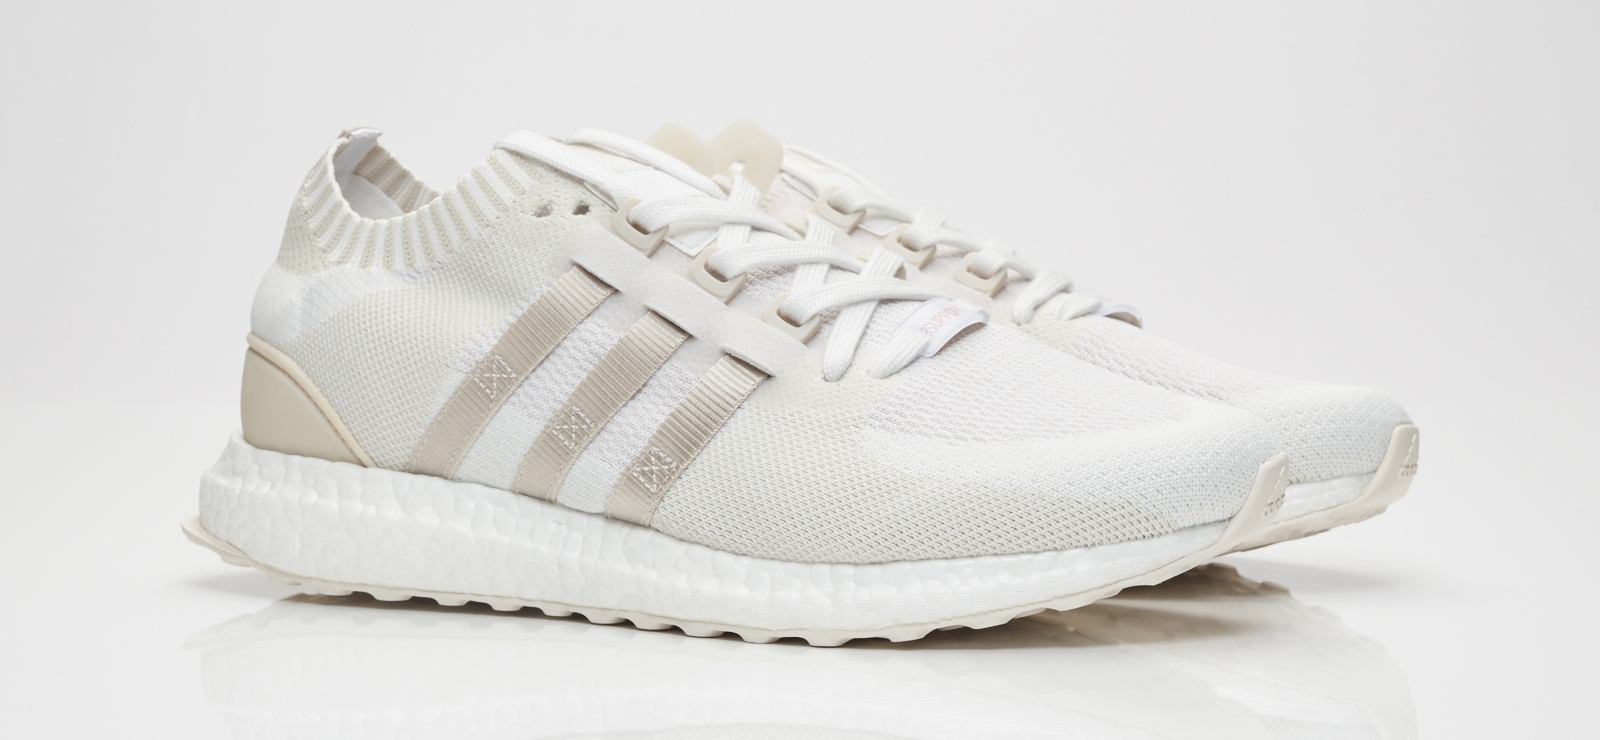 adidas-eqt-support-ultra-boost-pk-white-eqt-material-pack-1